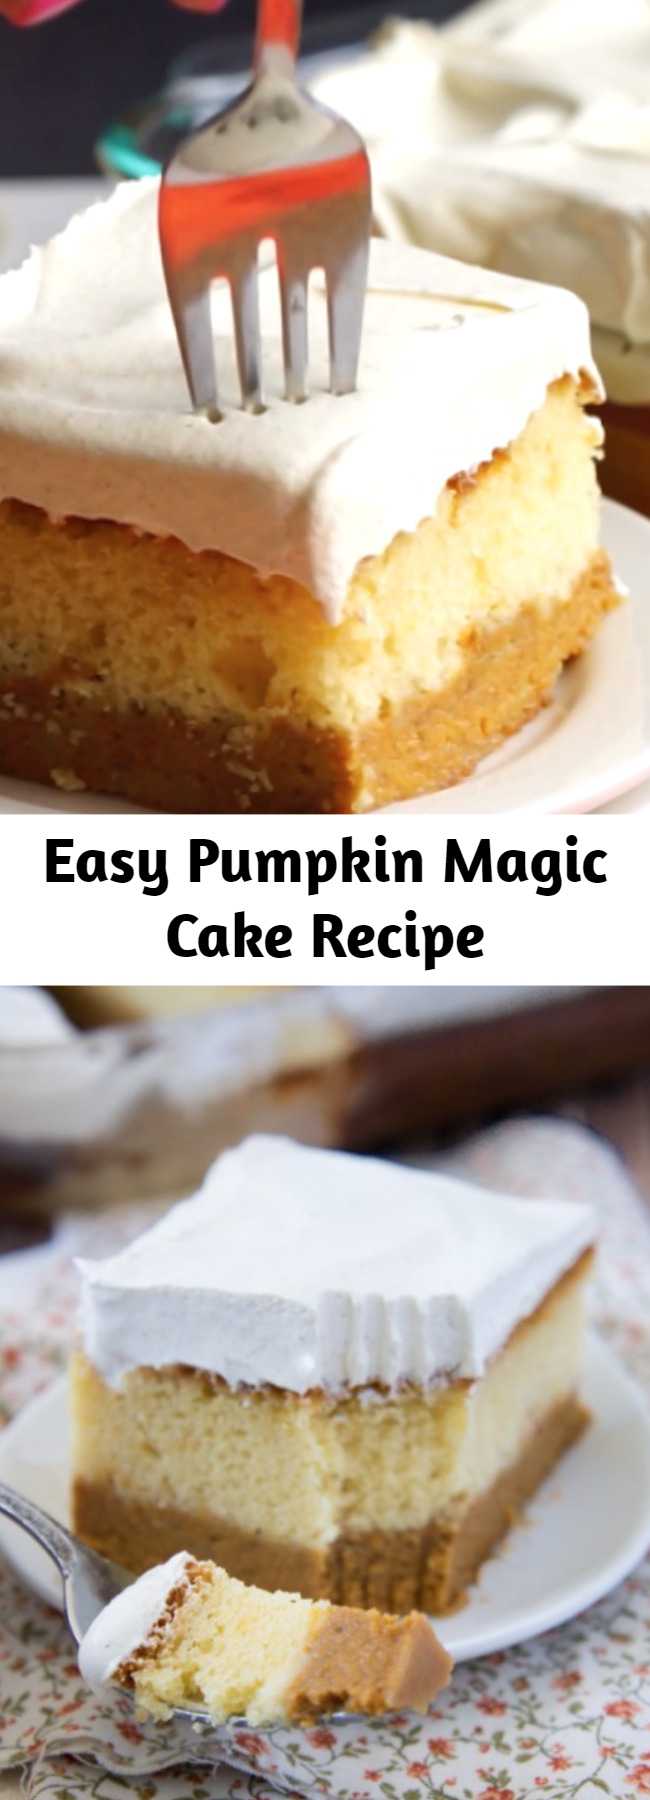 Easy Pumpkin Magic Cake Recipe - Pumpkin Magic Cake has a layer of pumpkin pie on the bottom, a layer of cake in the middle, finished off with a sweet layer of pumpkin pie spiced pudding/frosting on top.